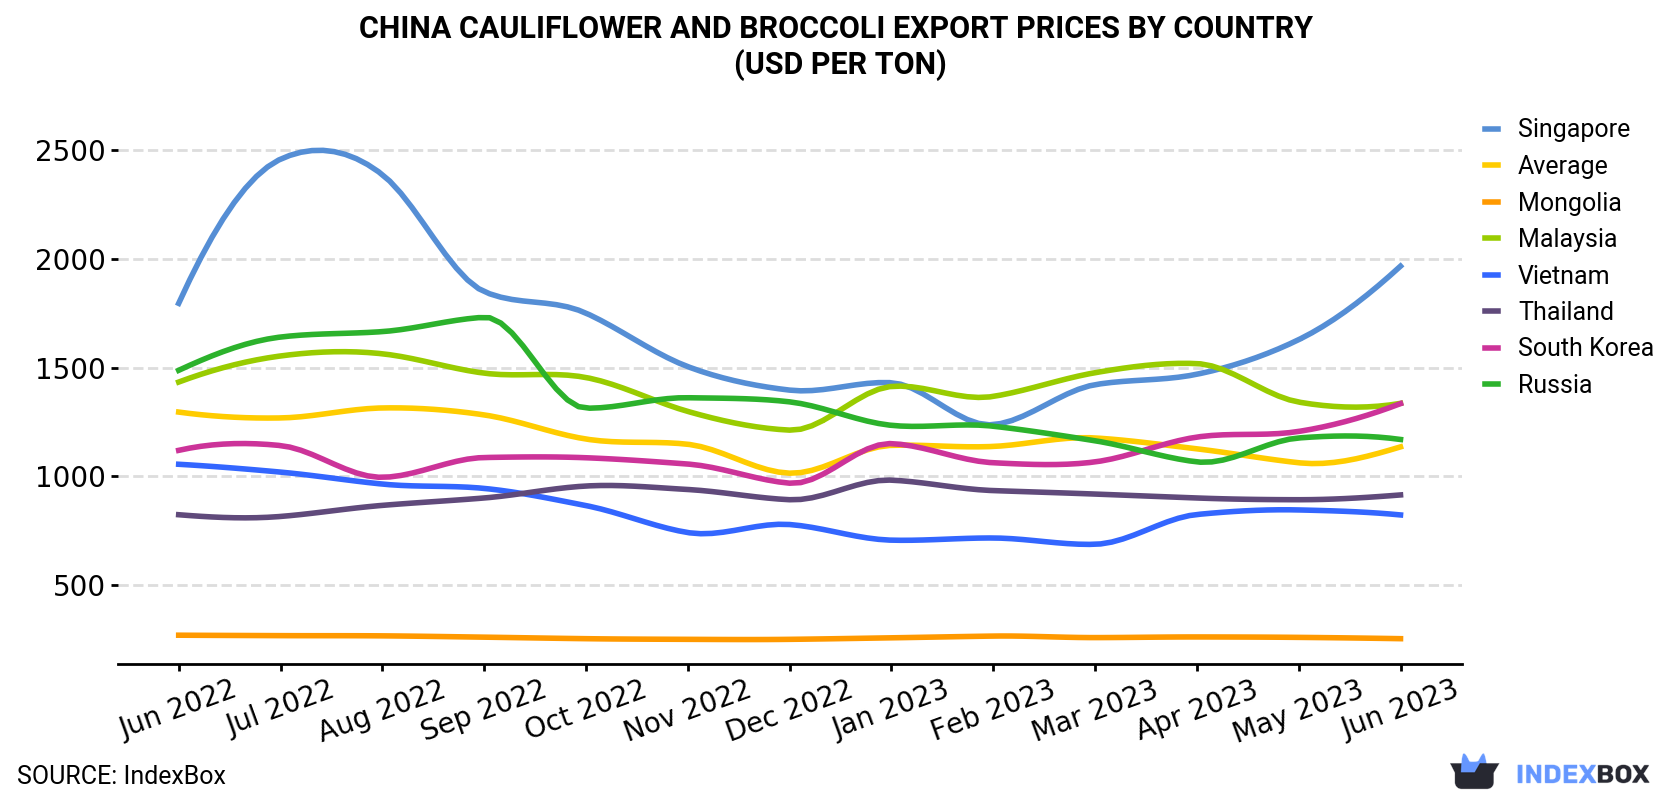 China Cauliflower And Broccoli Export Prices By Country (USD Per Ton)